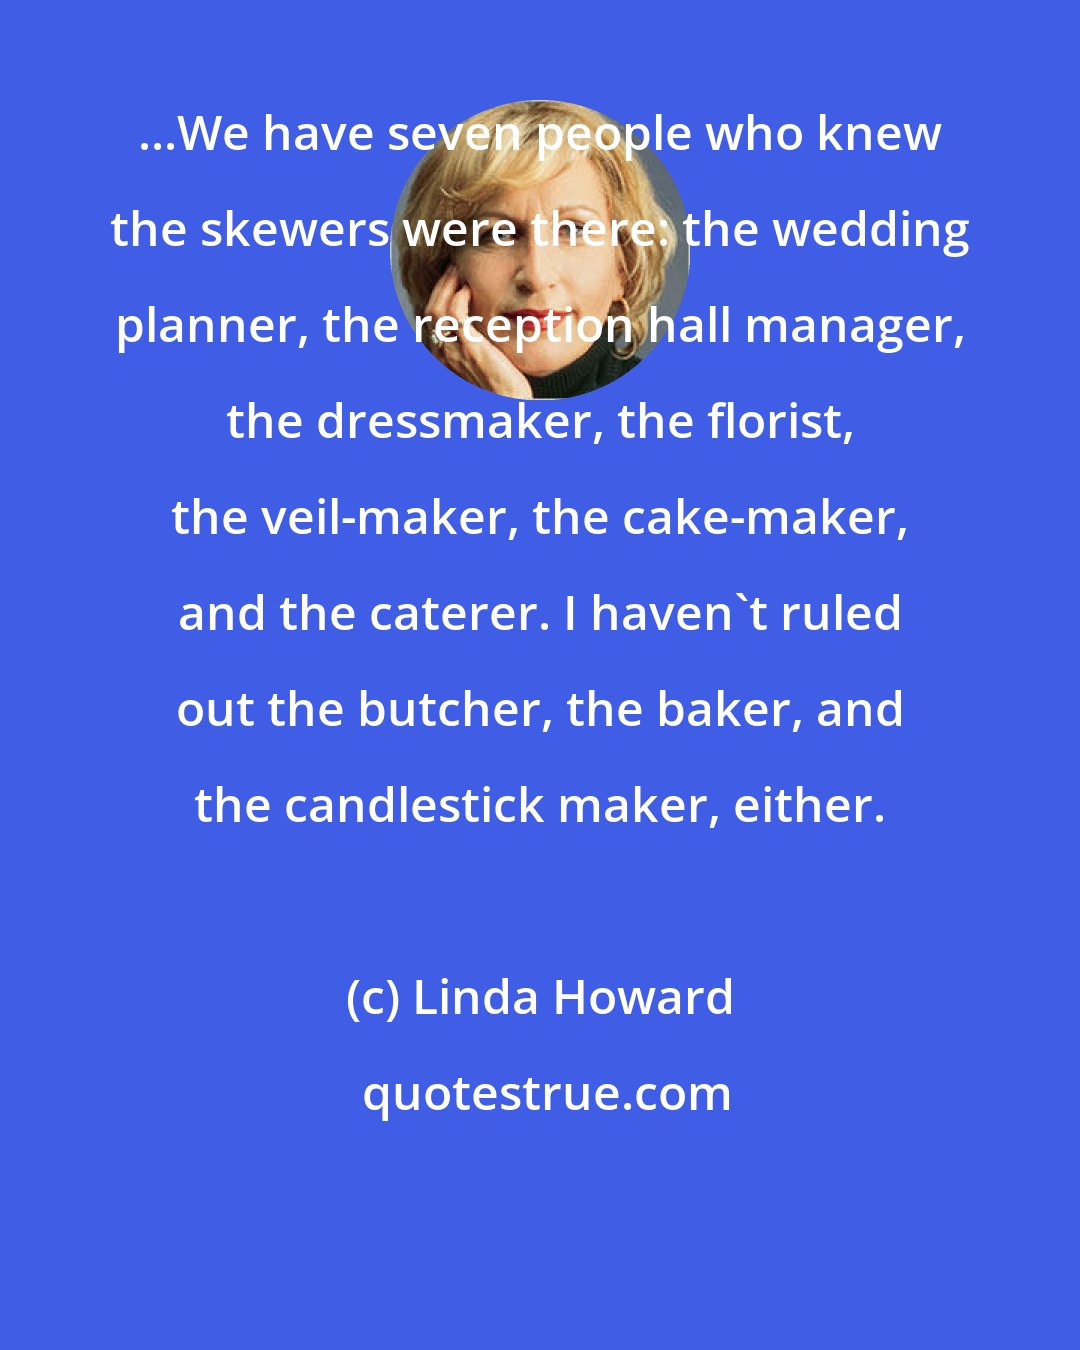 Linda Howard: ...We have seven people who knew the skewers were there: the wedding planner, the reception hall manager, the dressmaker, the florist, the veil-maker, the cake-maker, and the caterer. I haven't ruled out the butcher, the baker, and the candlestick maker, either.